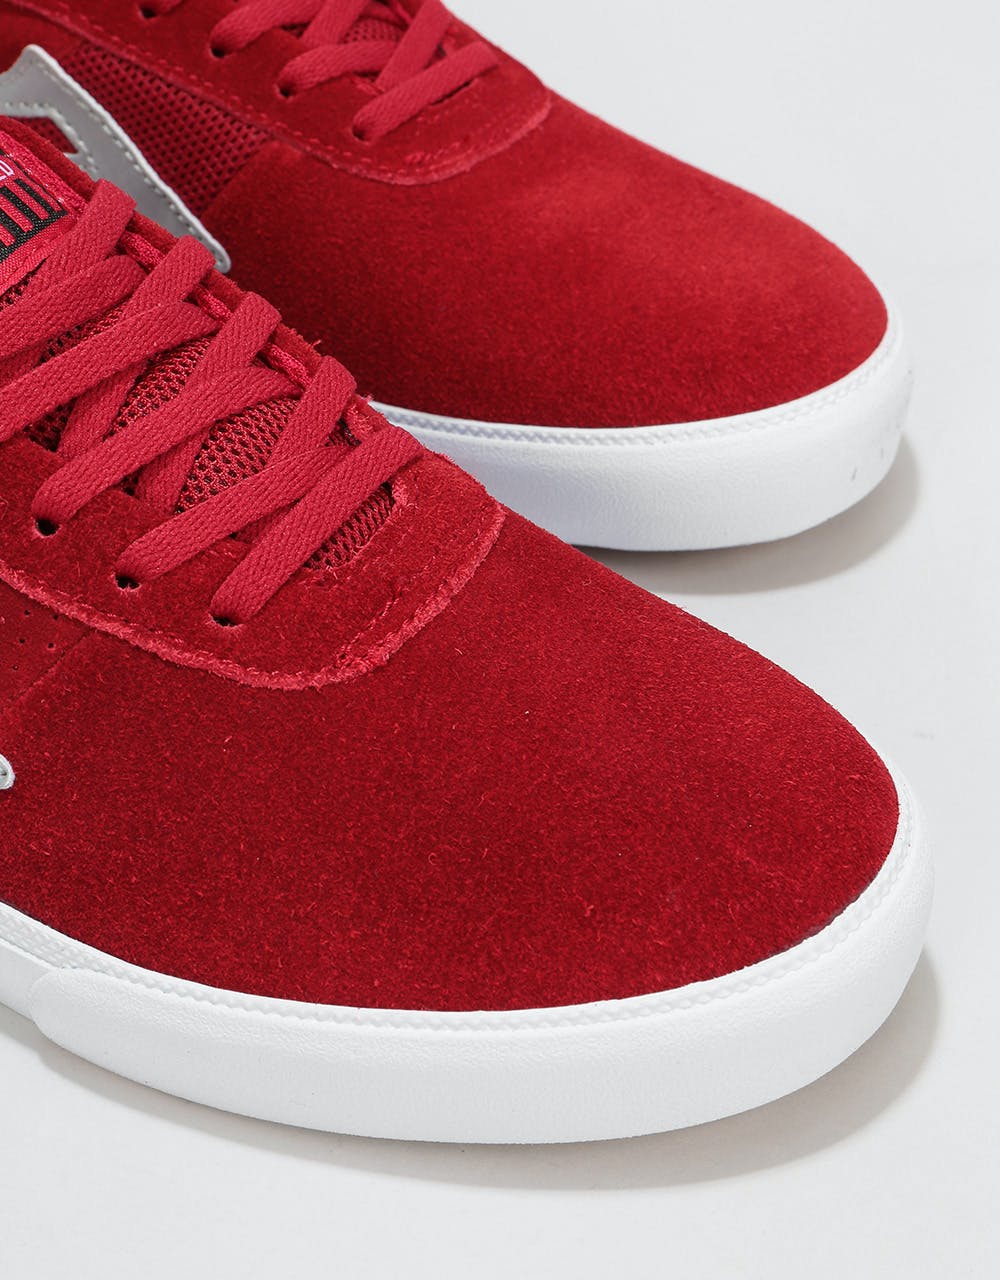 Lakai Sheffield Skate Shoes - Red/Silver Suede